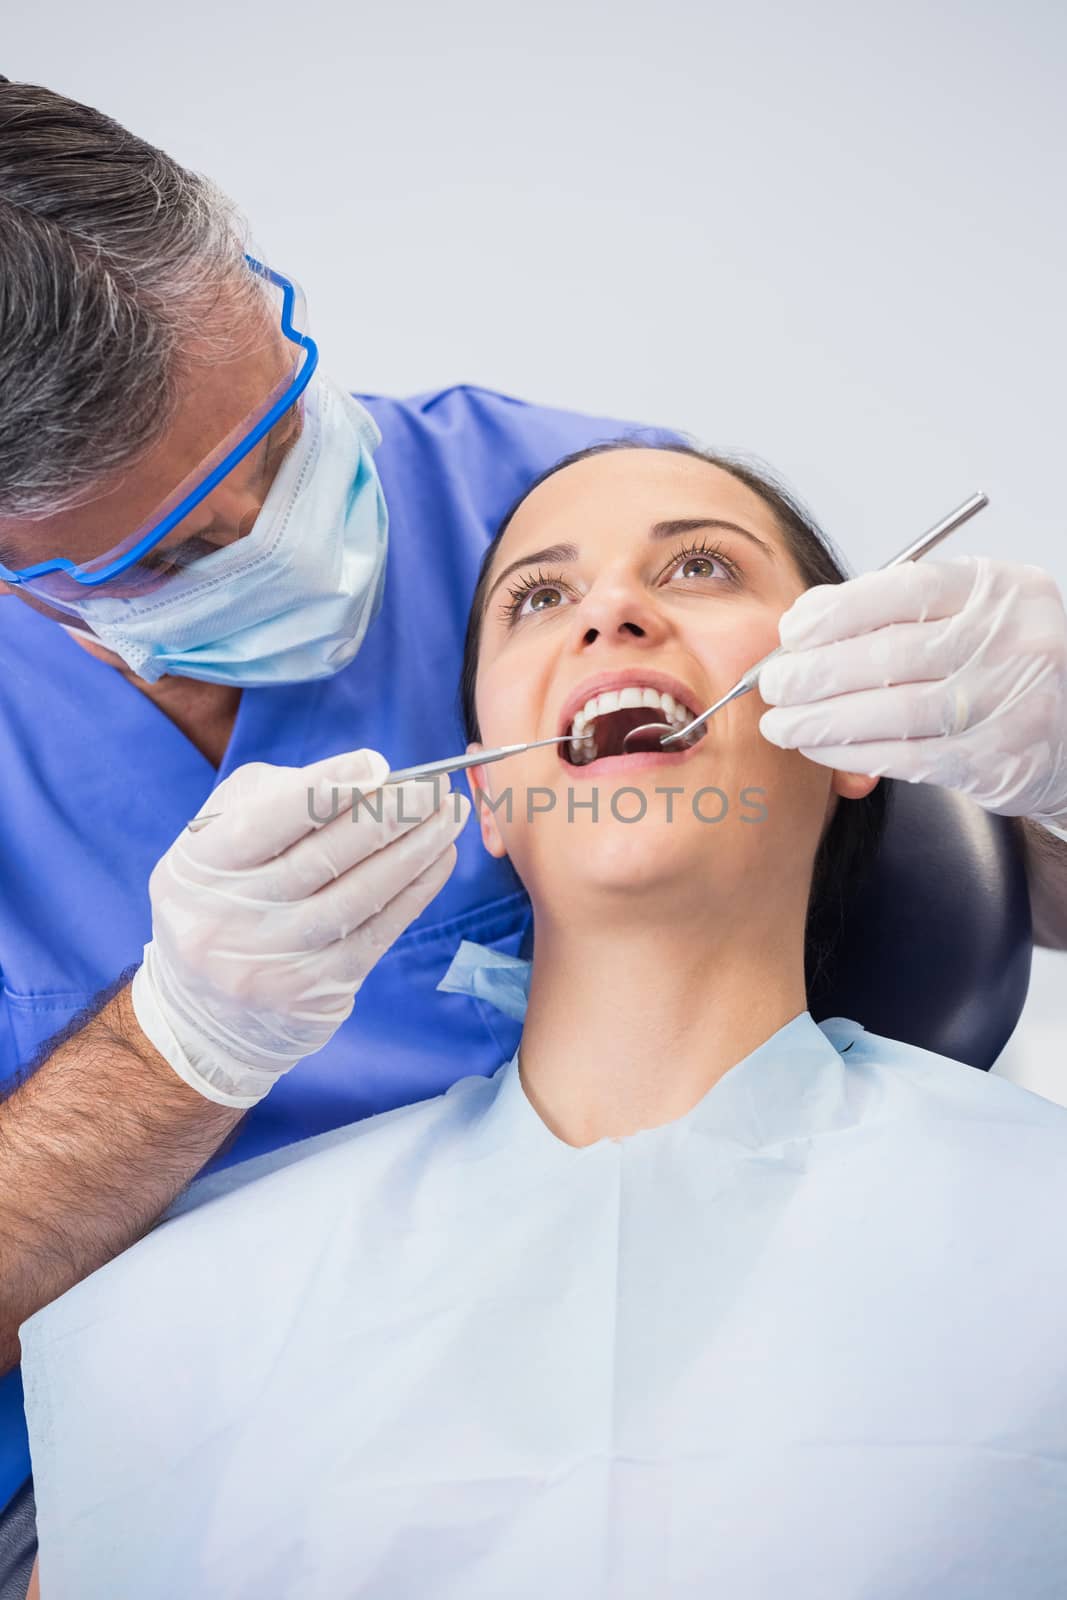 Dentist examining a patient with angle mirror and sickle probe in dental clinic